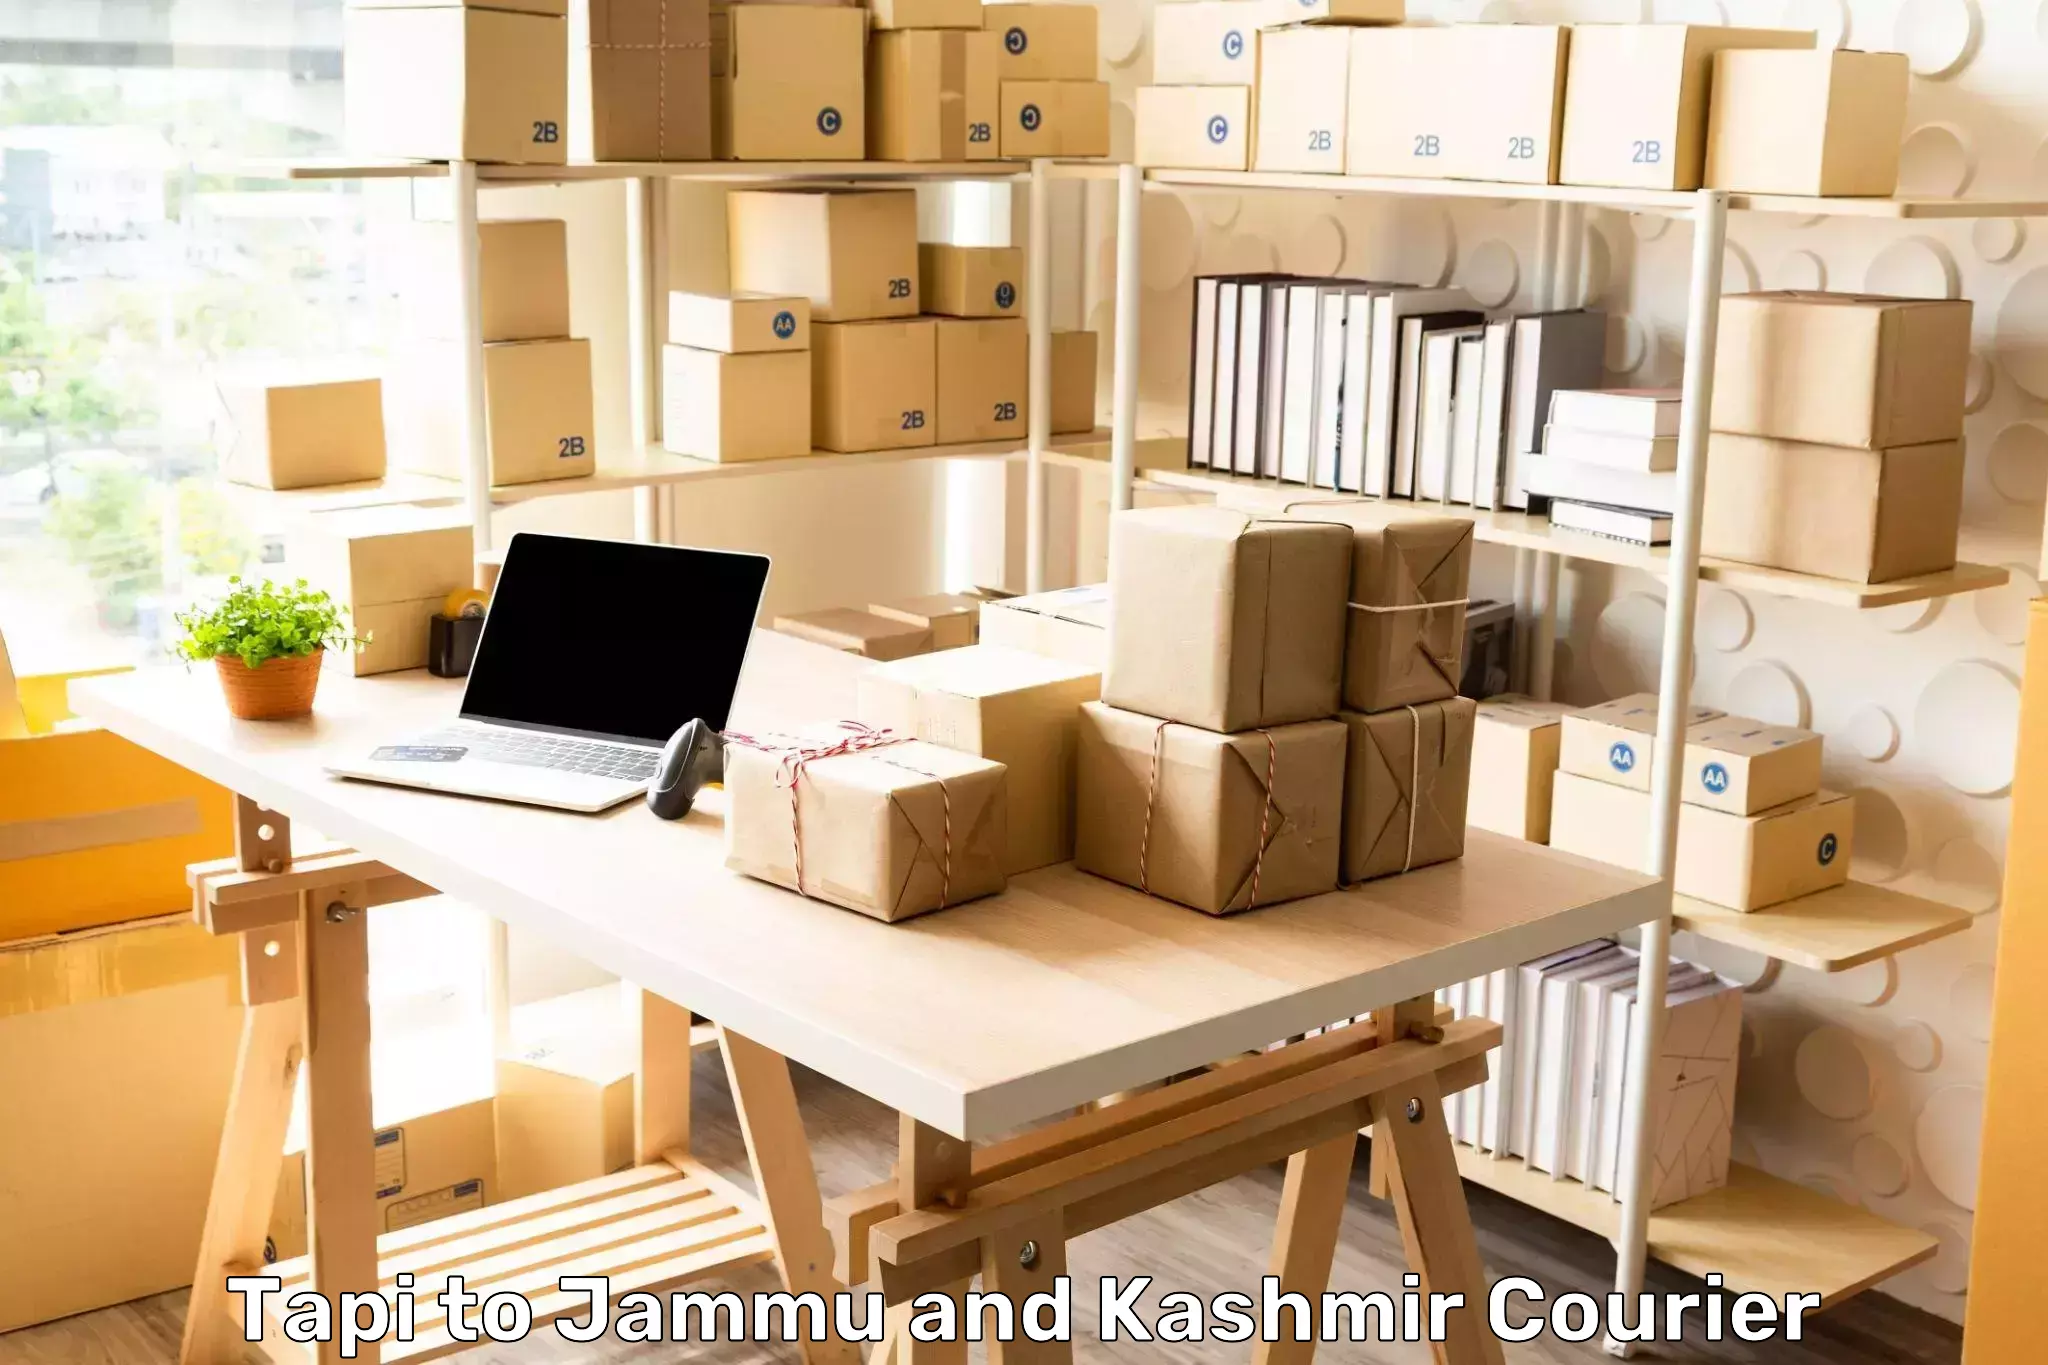 Customer-centric shipping Tapi to Udhampur